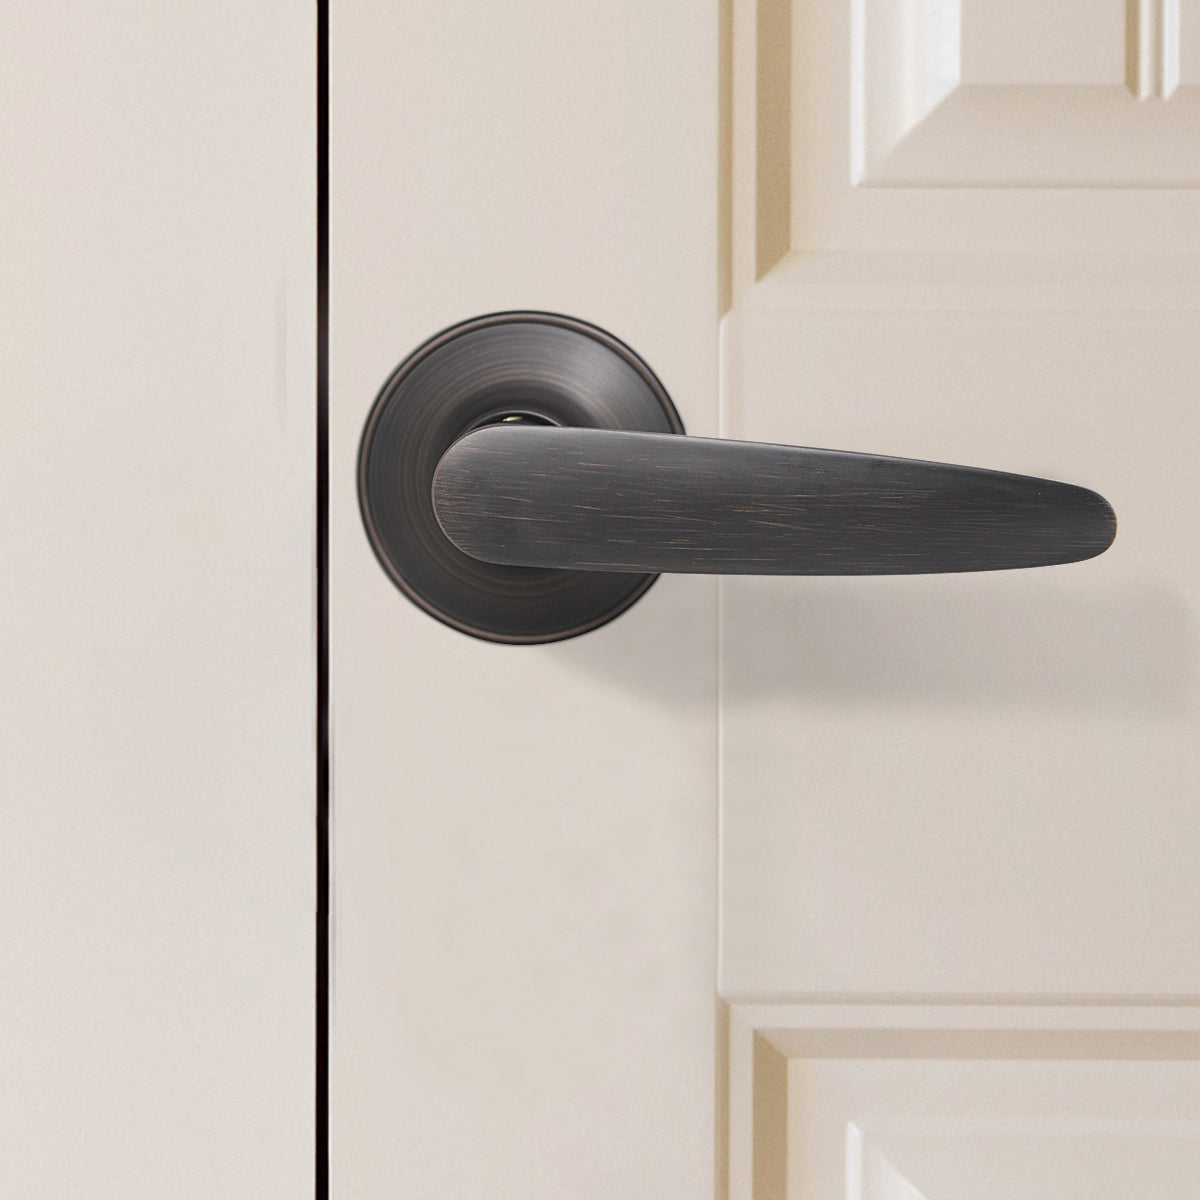 Passage Door Lever set for Closet and Hall, Leaf Style, Oil Rubbed Bronze finish DL815ORBPS - Probrico